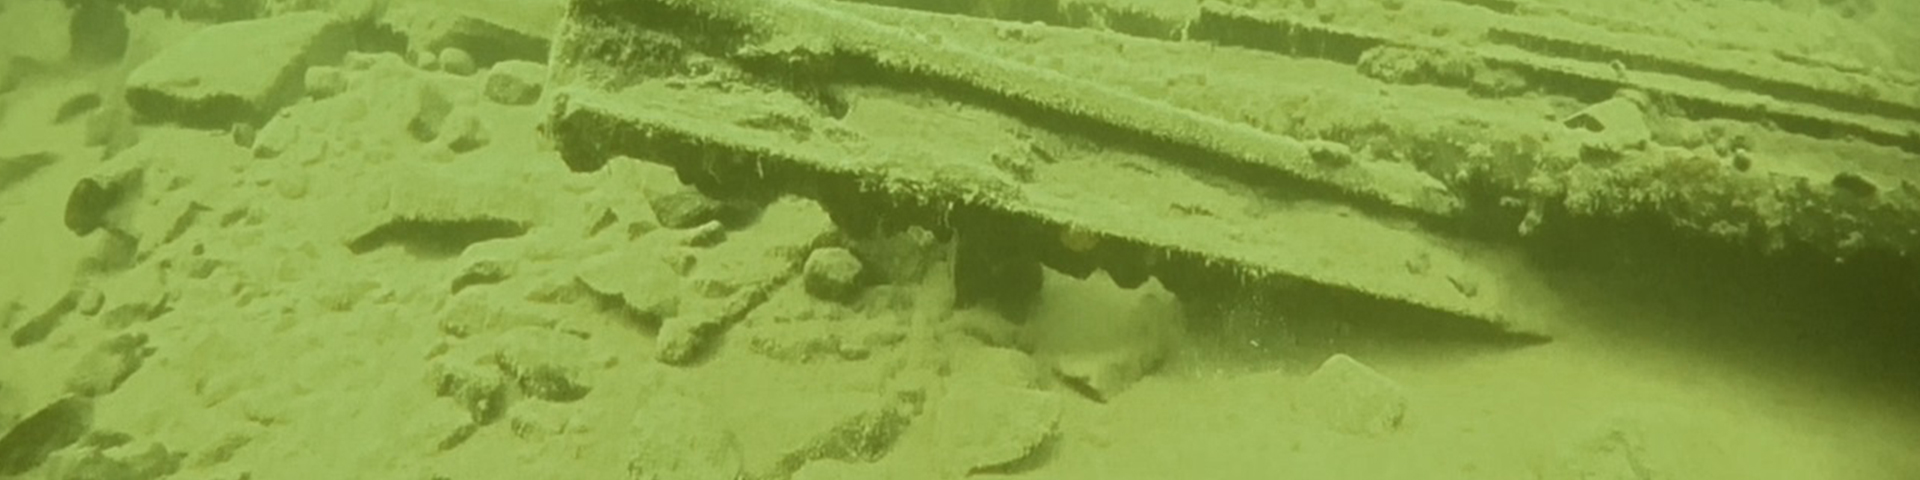 A screen capture from the ROV Ursula showing a ghostly image of rail stock and debris likely from a previous train derailment